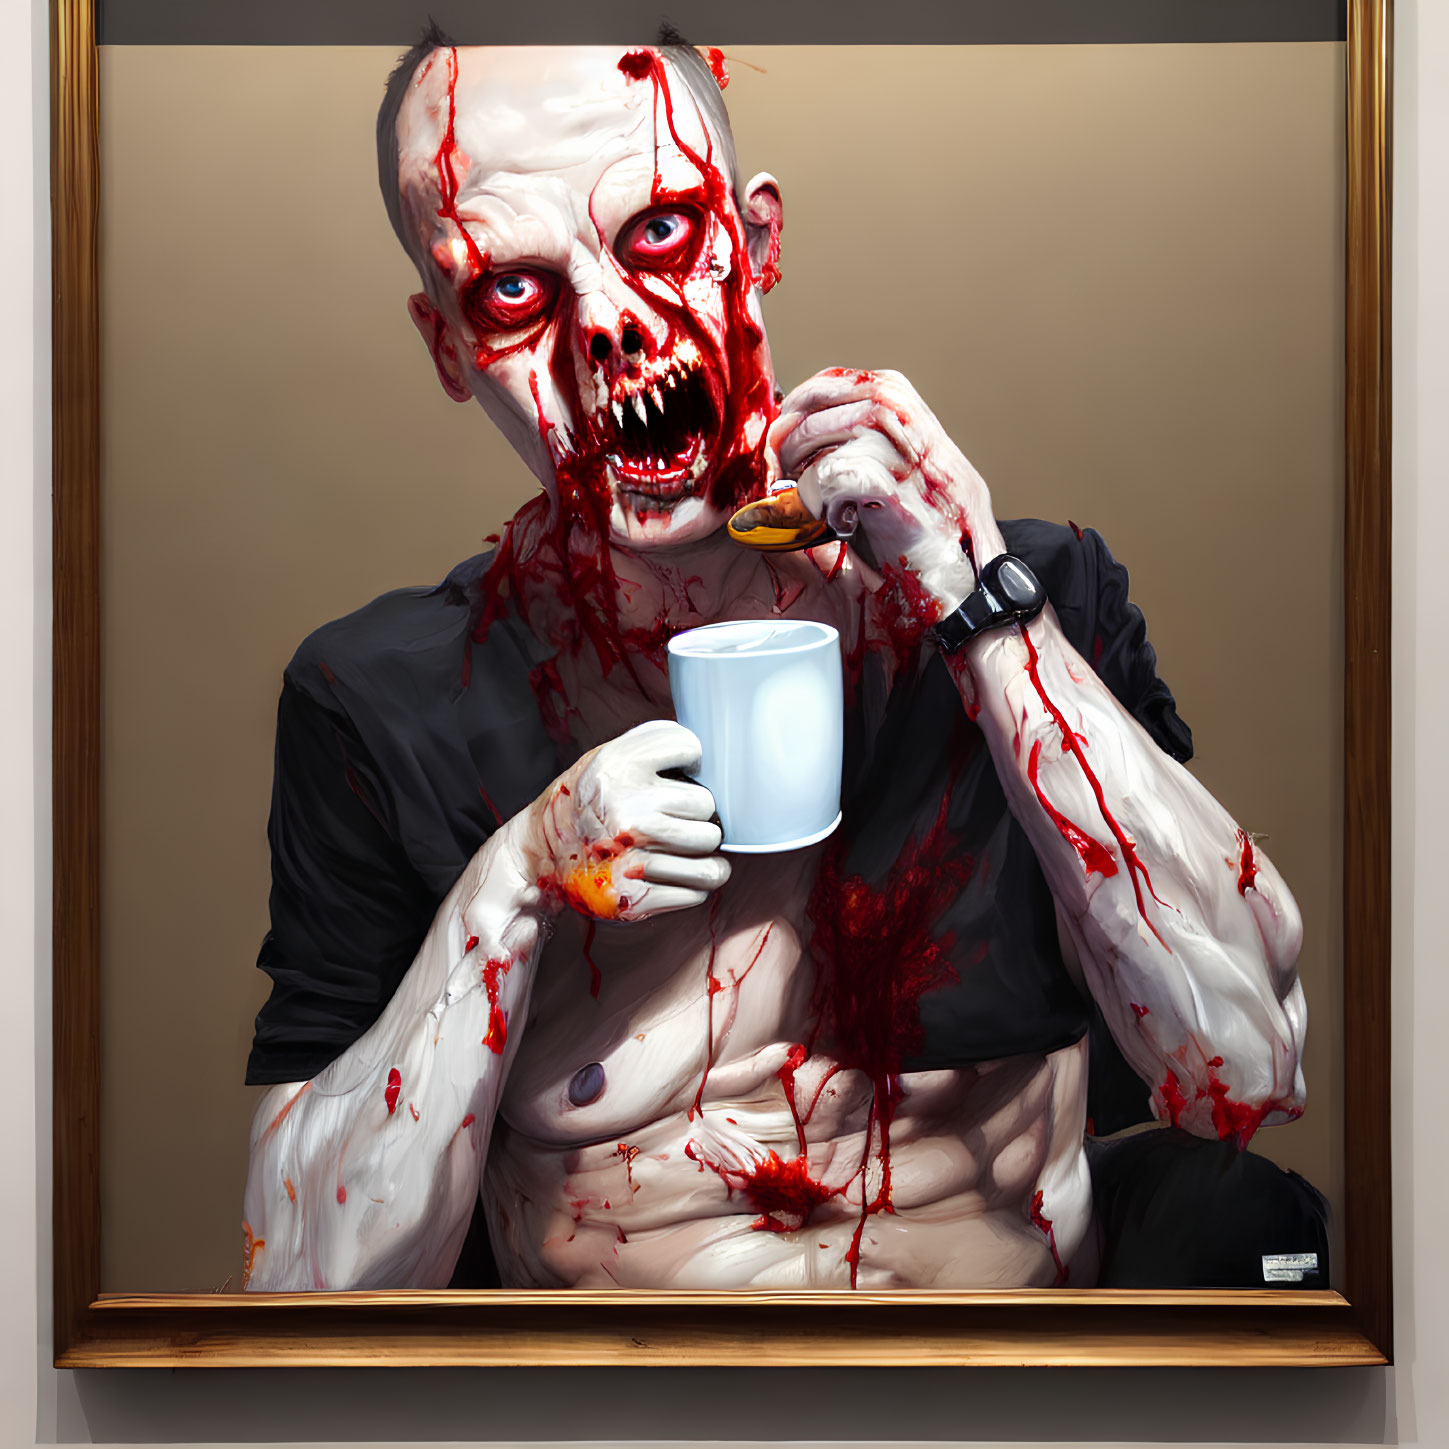 Black-shirted zombie-like creature with spoon and mug, surrounded by bloodstains